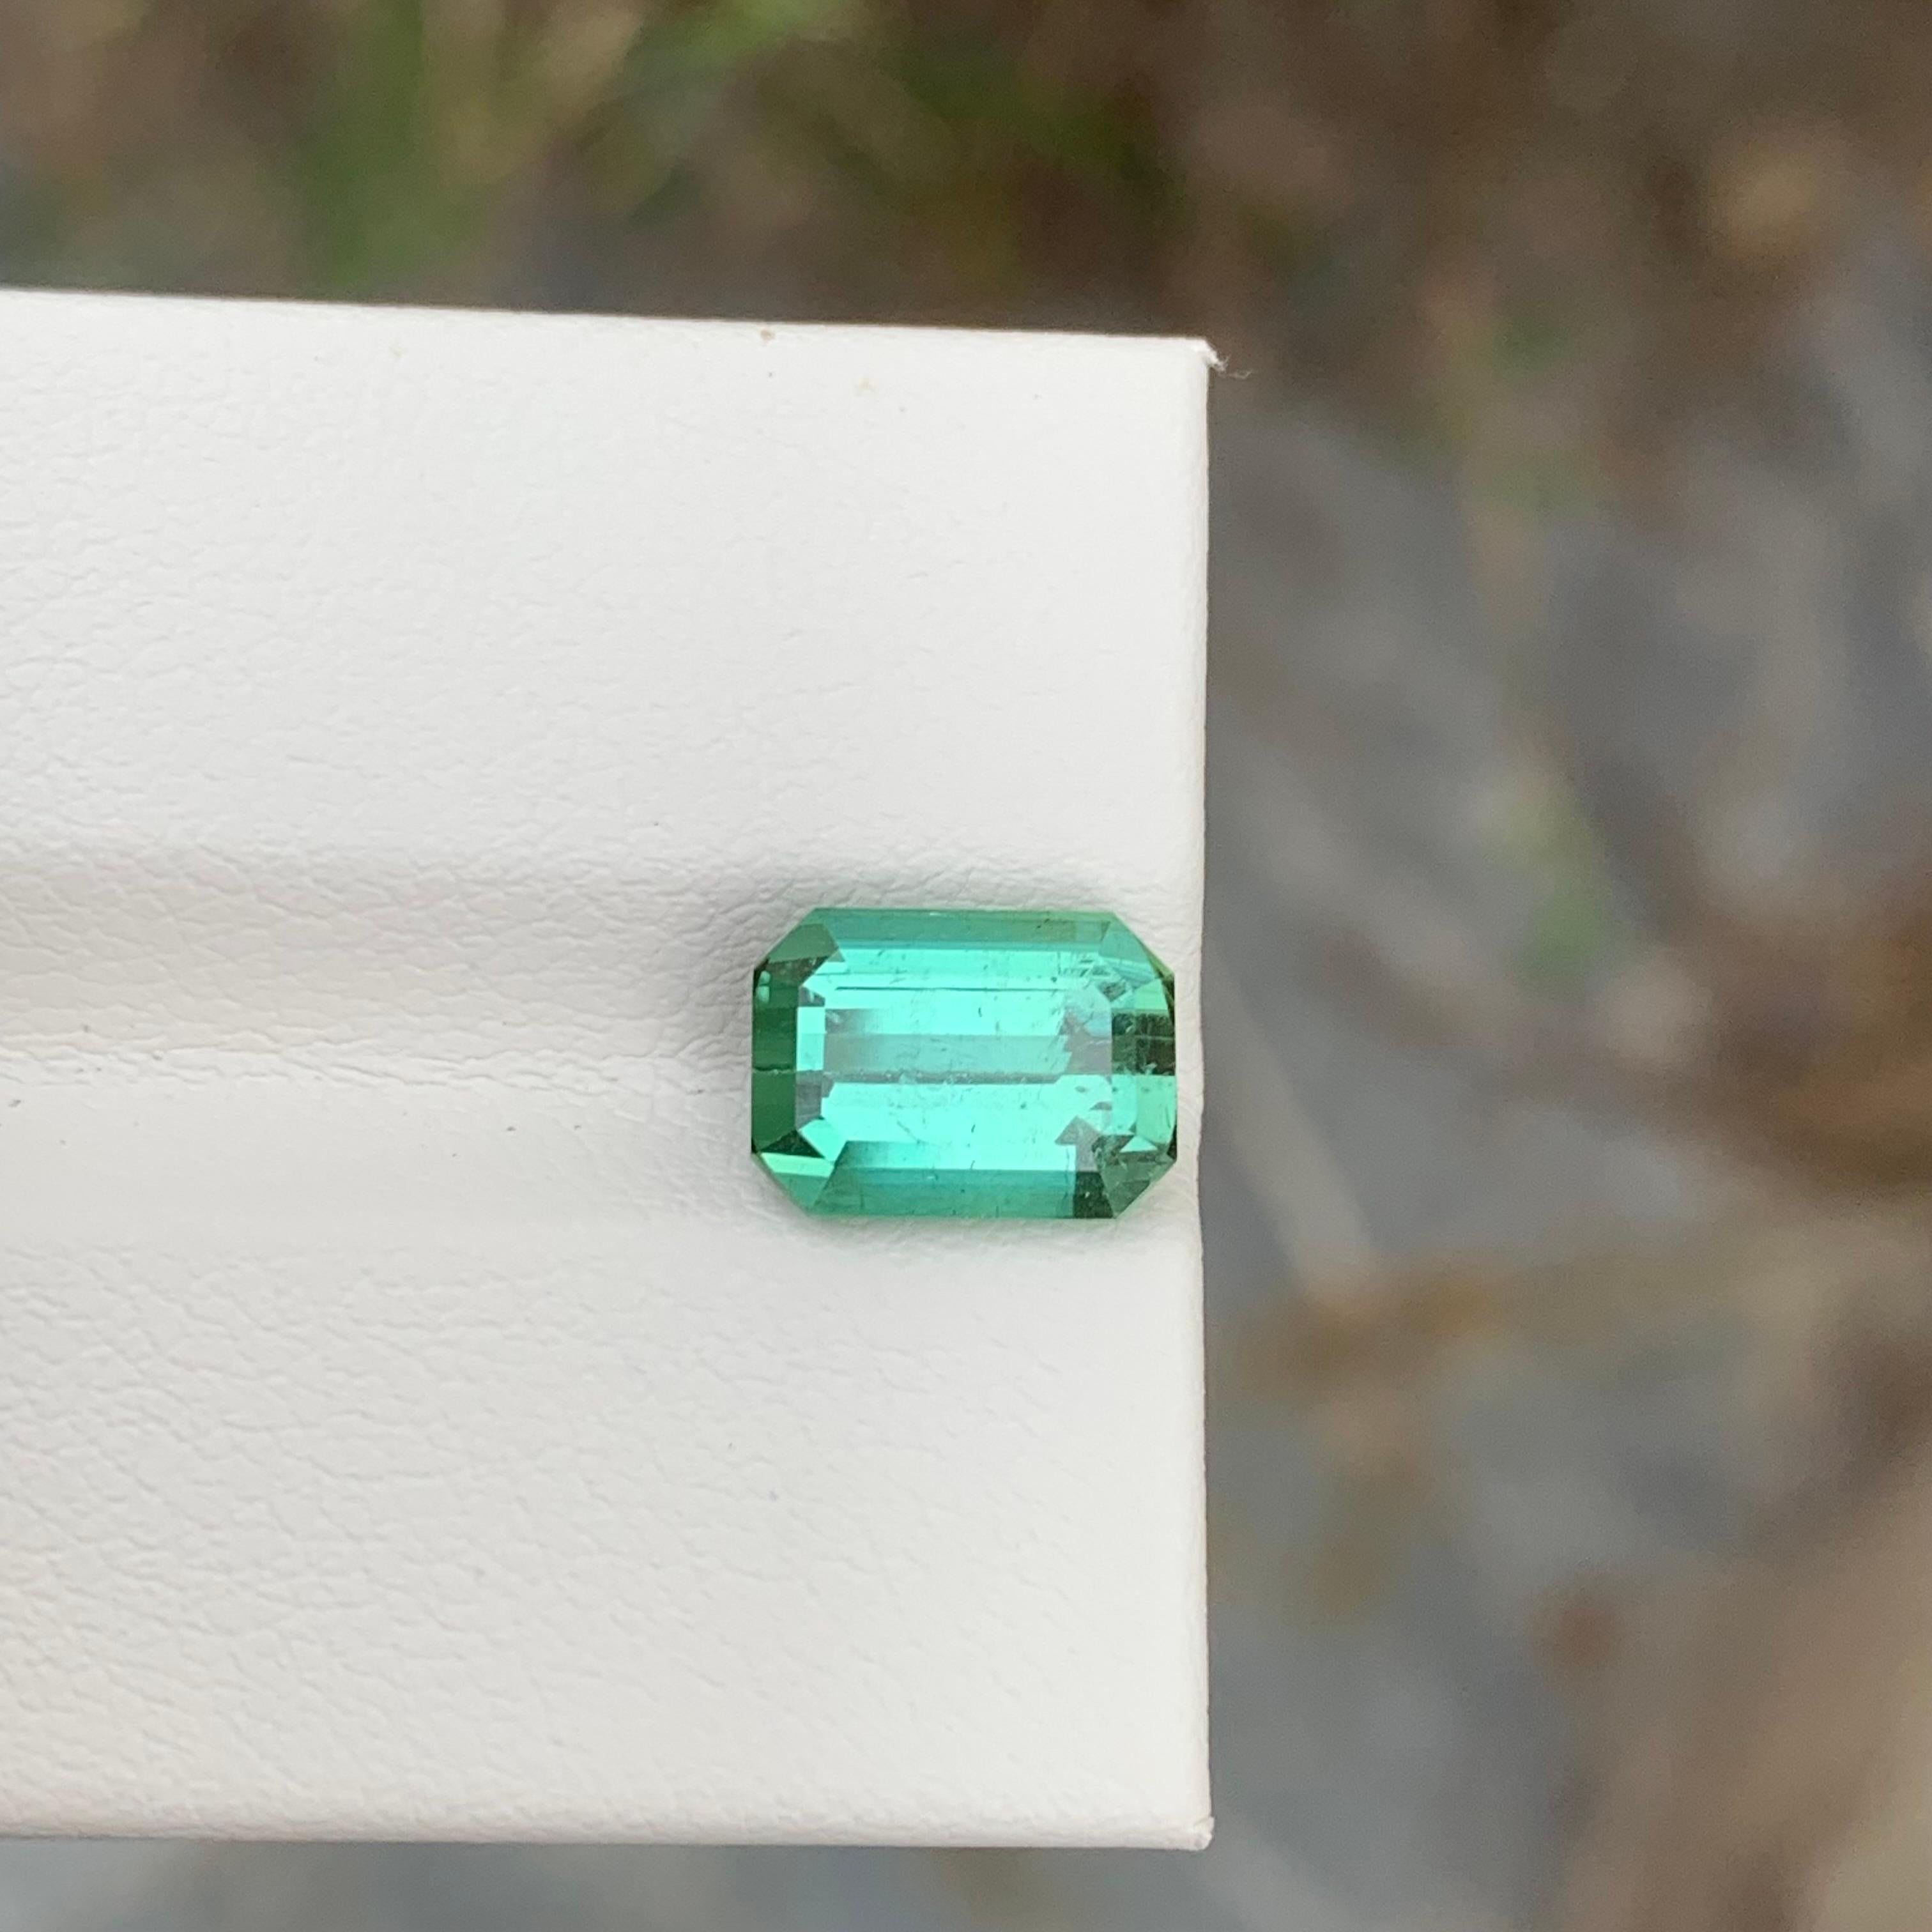 Arts and Crafts 3.10 Carat Natural Loose Bright Green Tourmaline Emerald Shape For Sale